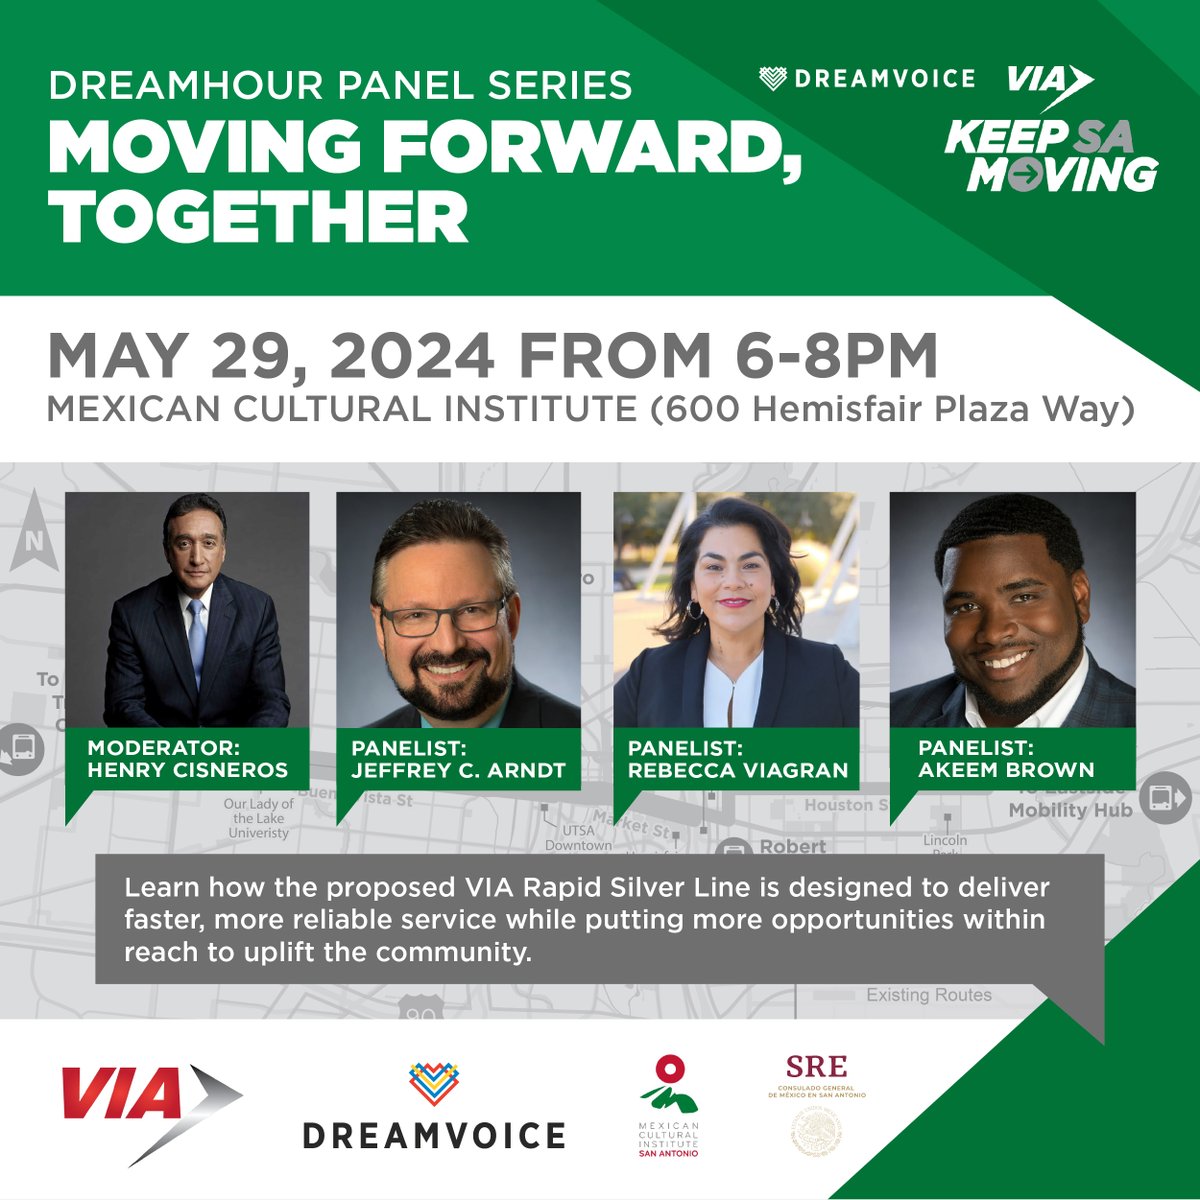 Save the Date! Join VIA and @DreamWeekSA on Wednesday, May 29, from 6 p.m. to 8 p.m. at the Mexican Cultural Institute for the DreamHour Panel Series: Moving Forward, Together! The event is free and open to the public. 🌟 Learn more at KeepSAmoving.com.